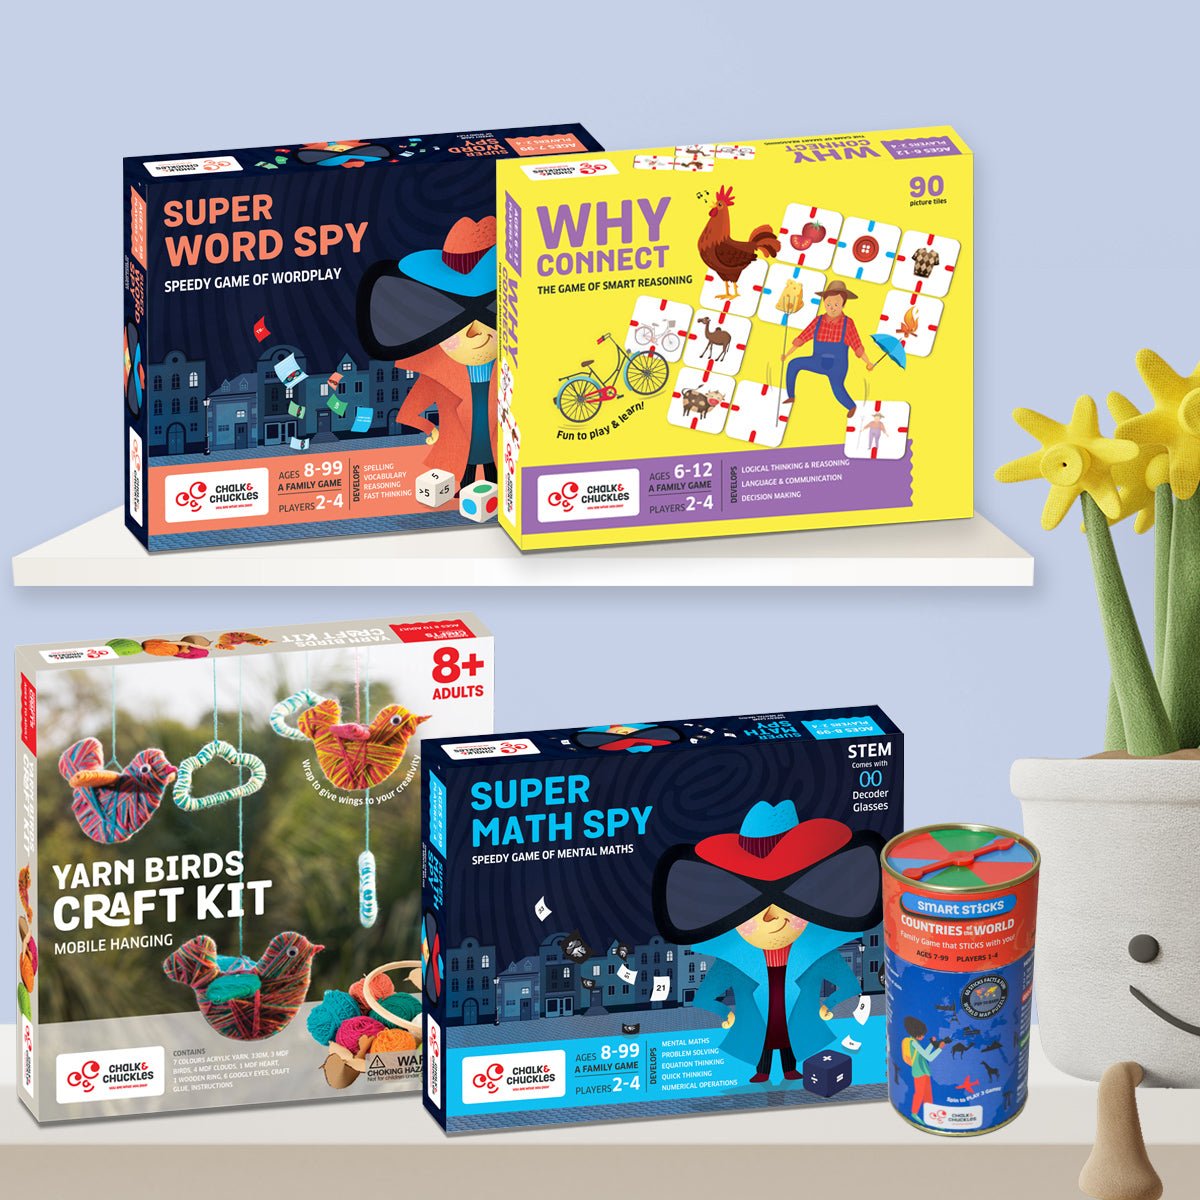 Chalk and Chuckles Family and Children Favourites Educational Games Bundle, Best-Selling Toys and Games for Boys and Girls age 6-14 years old